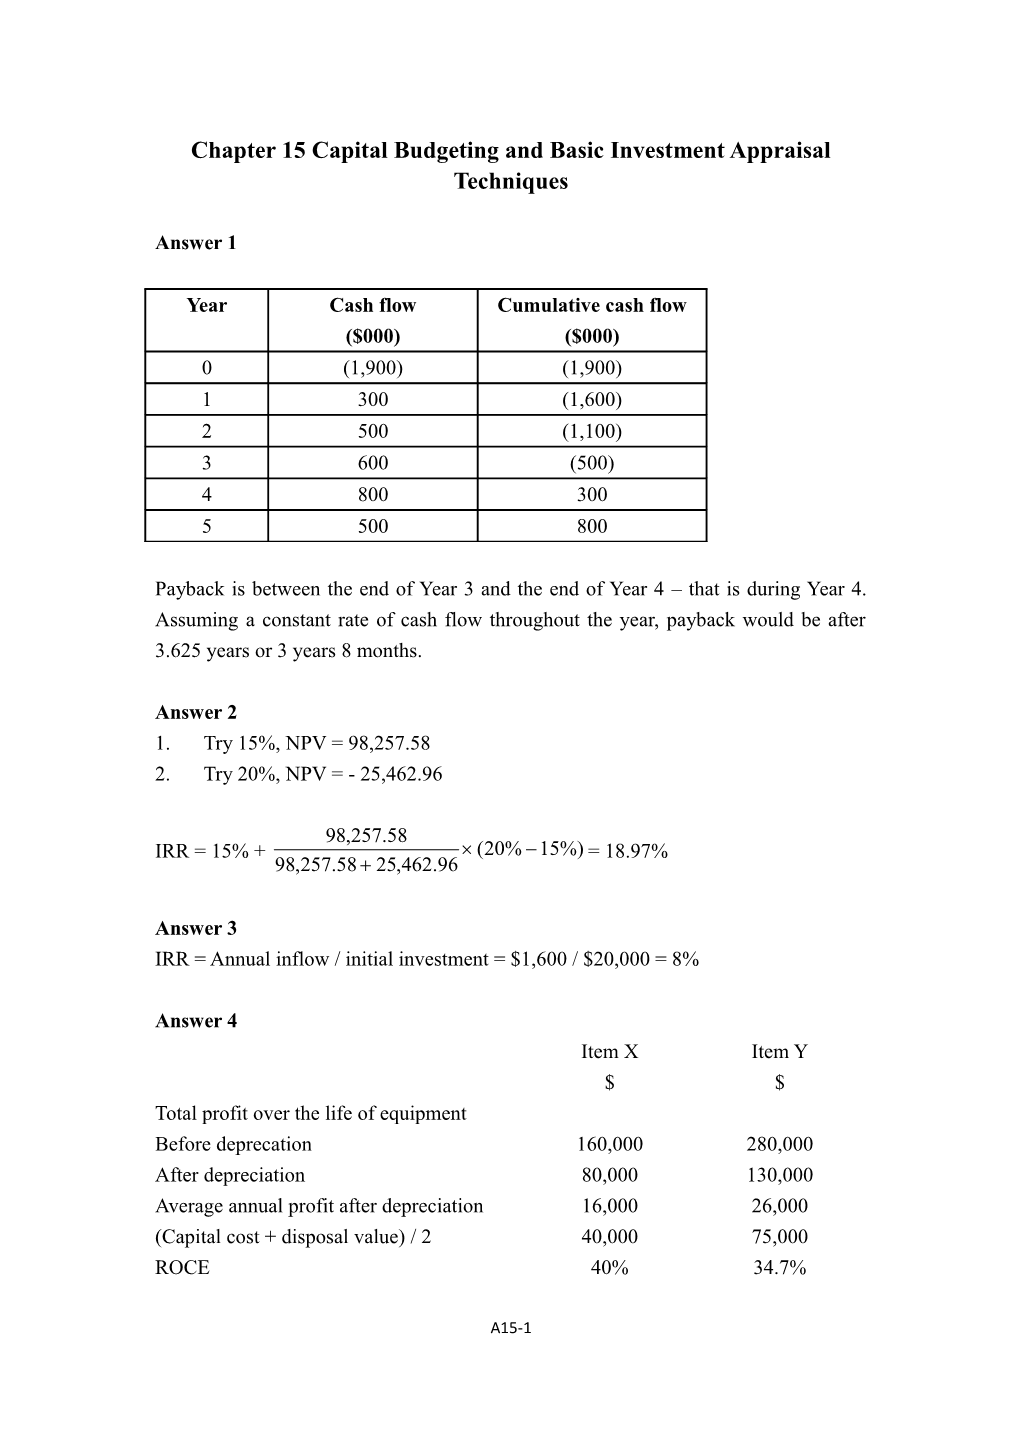 Chapter 15 Capital Budgeting and Basic Investment Appraisal Techniques